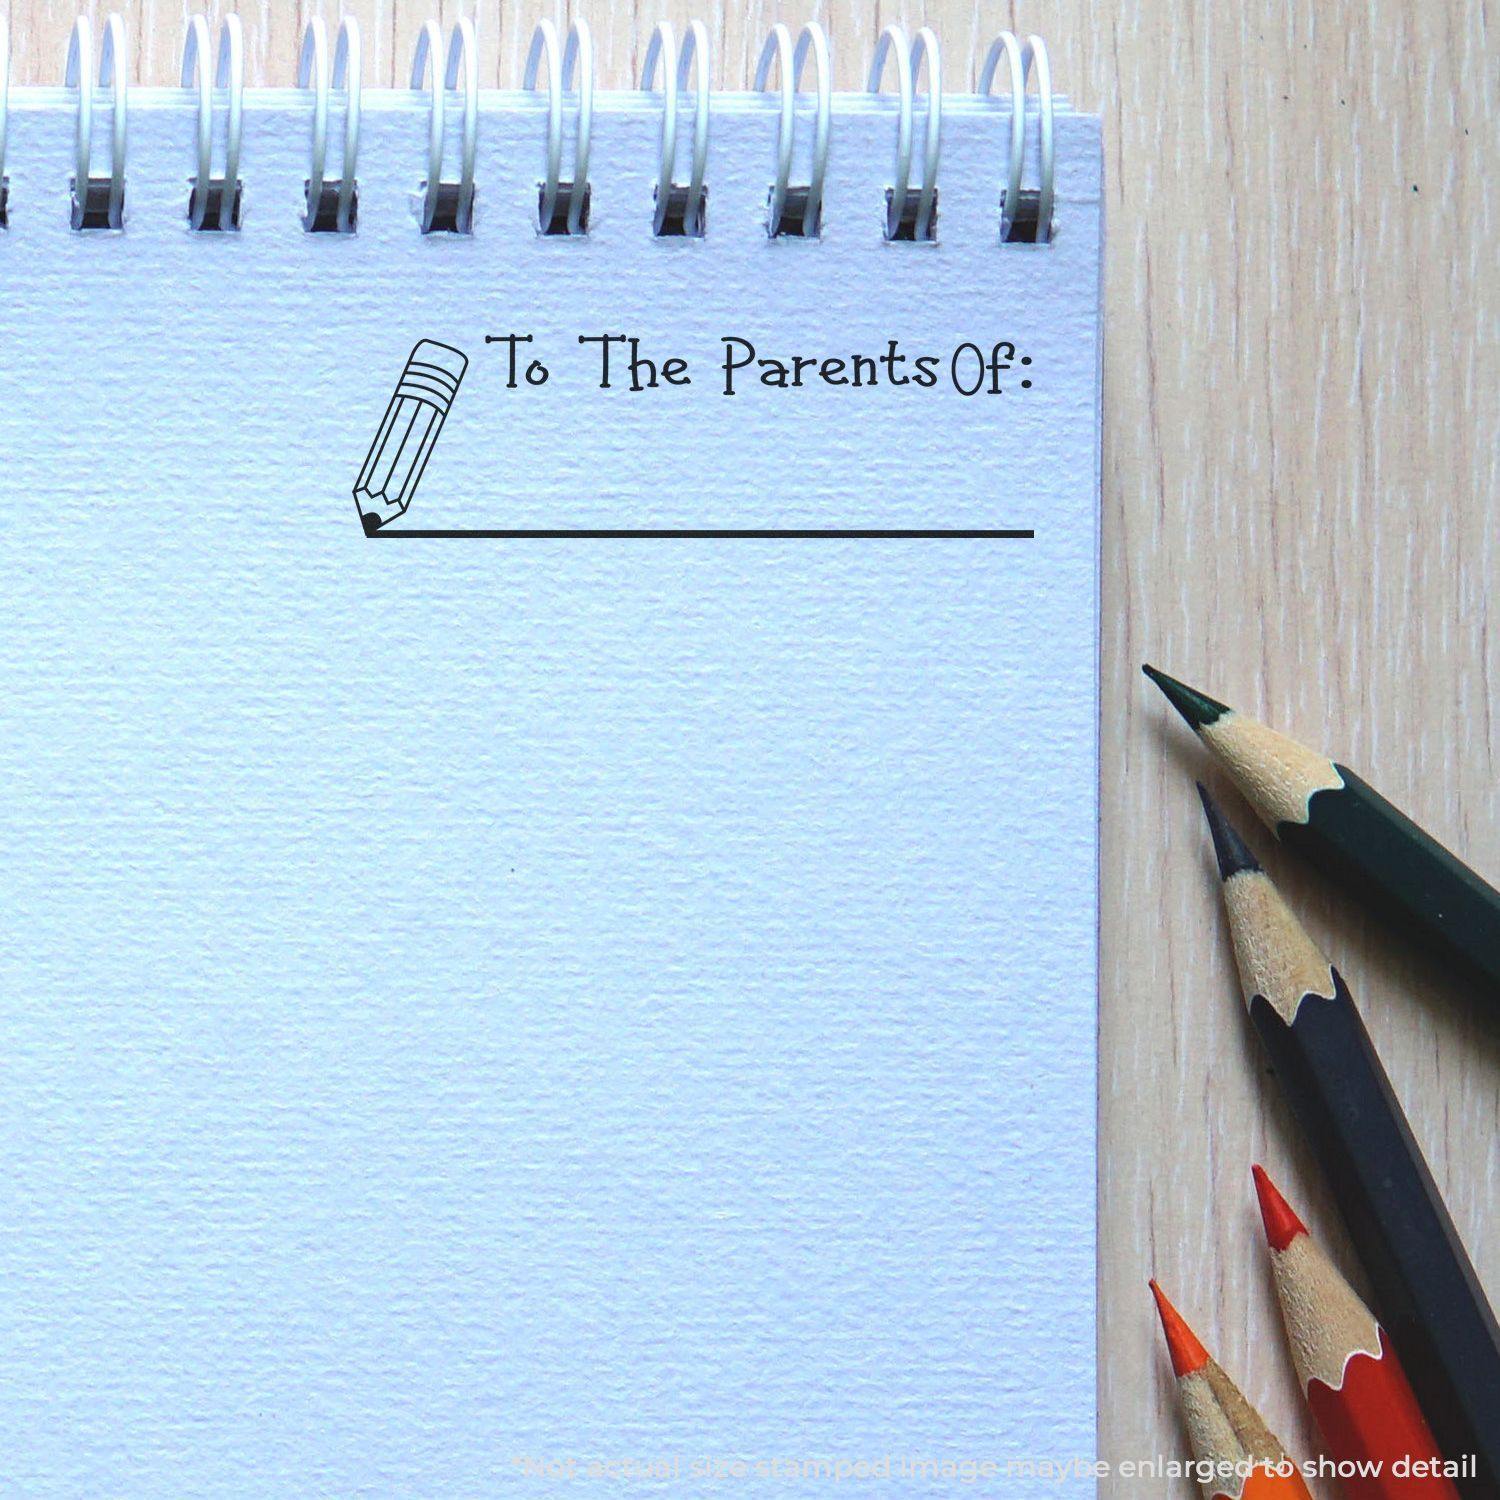 A self-inking stamp with a stamped image showing how the text "To The Parents Of:" with an image of a pencil next to the line is displayed after stamping.